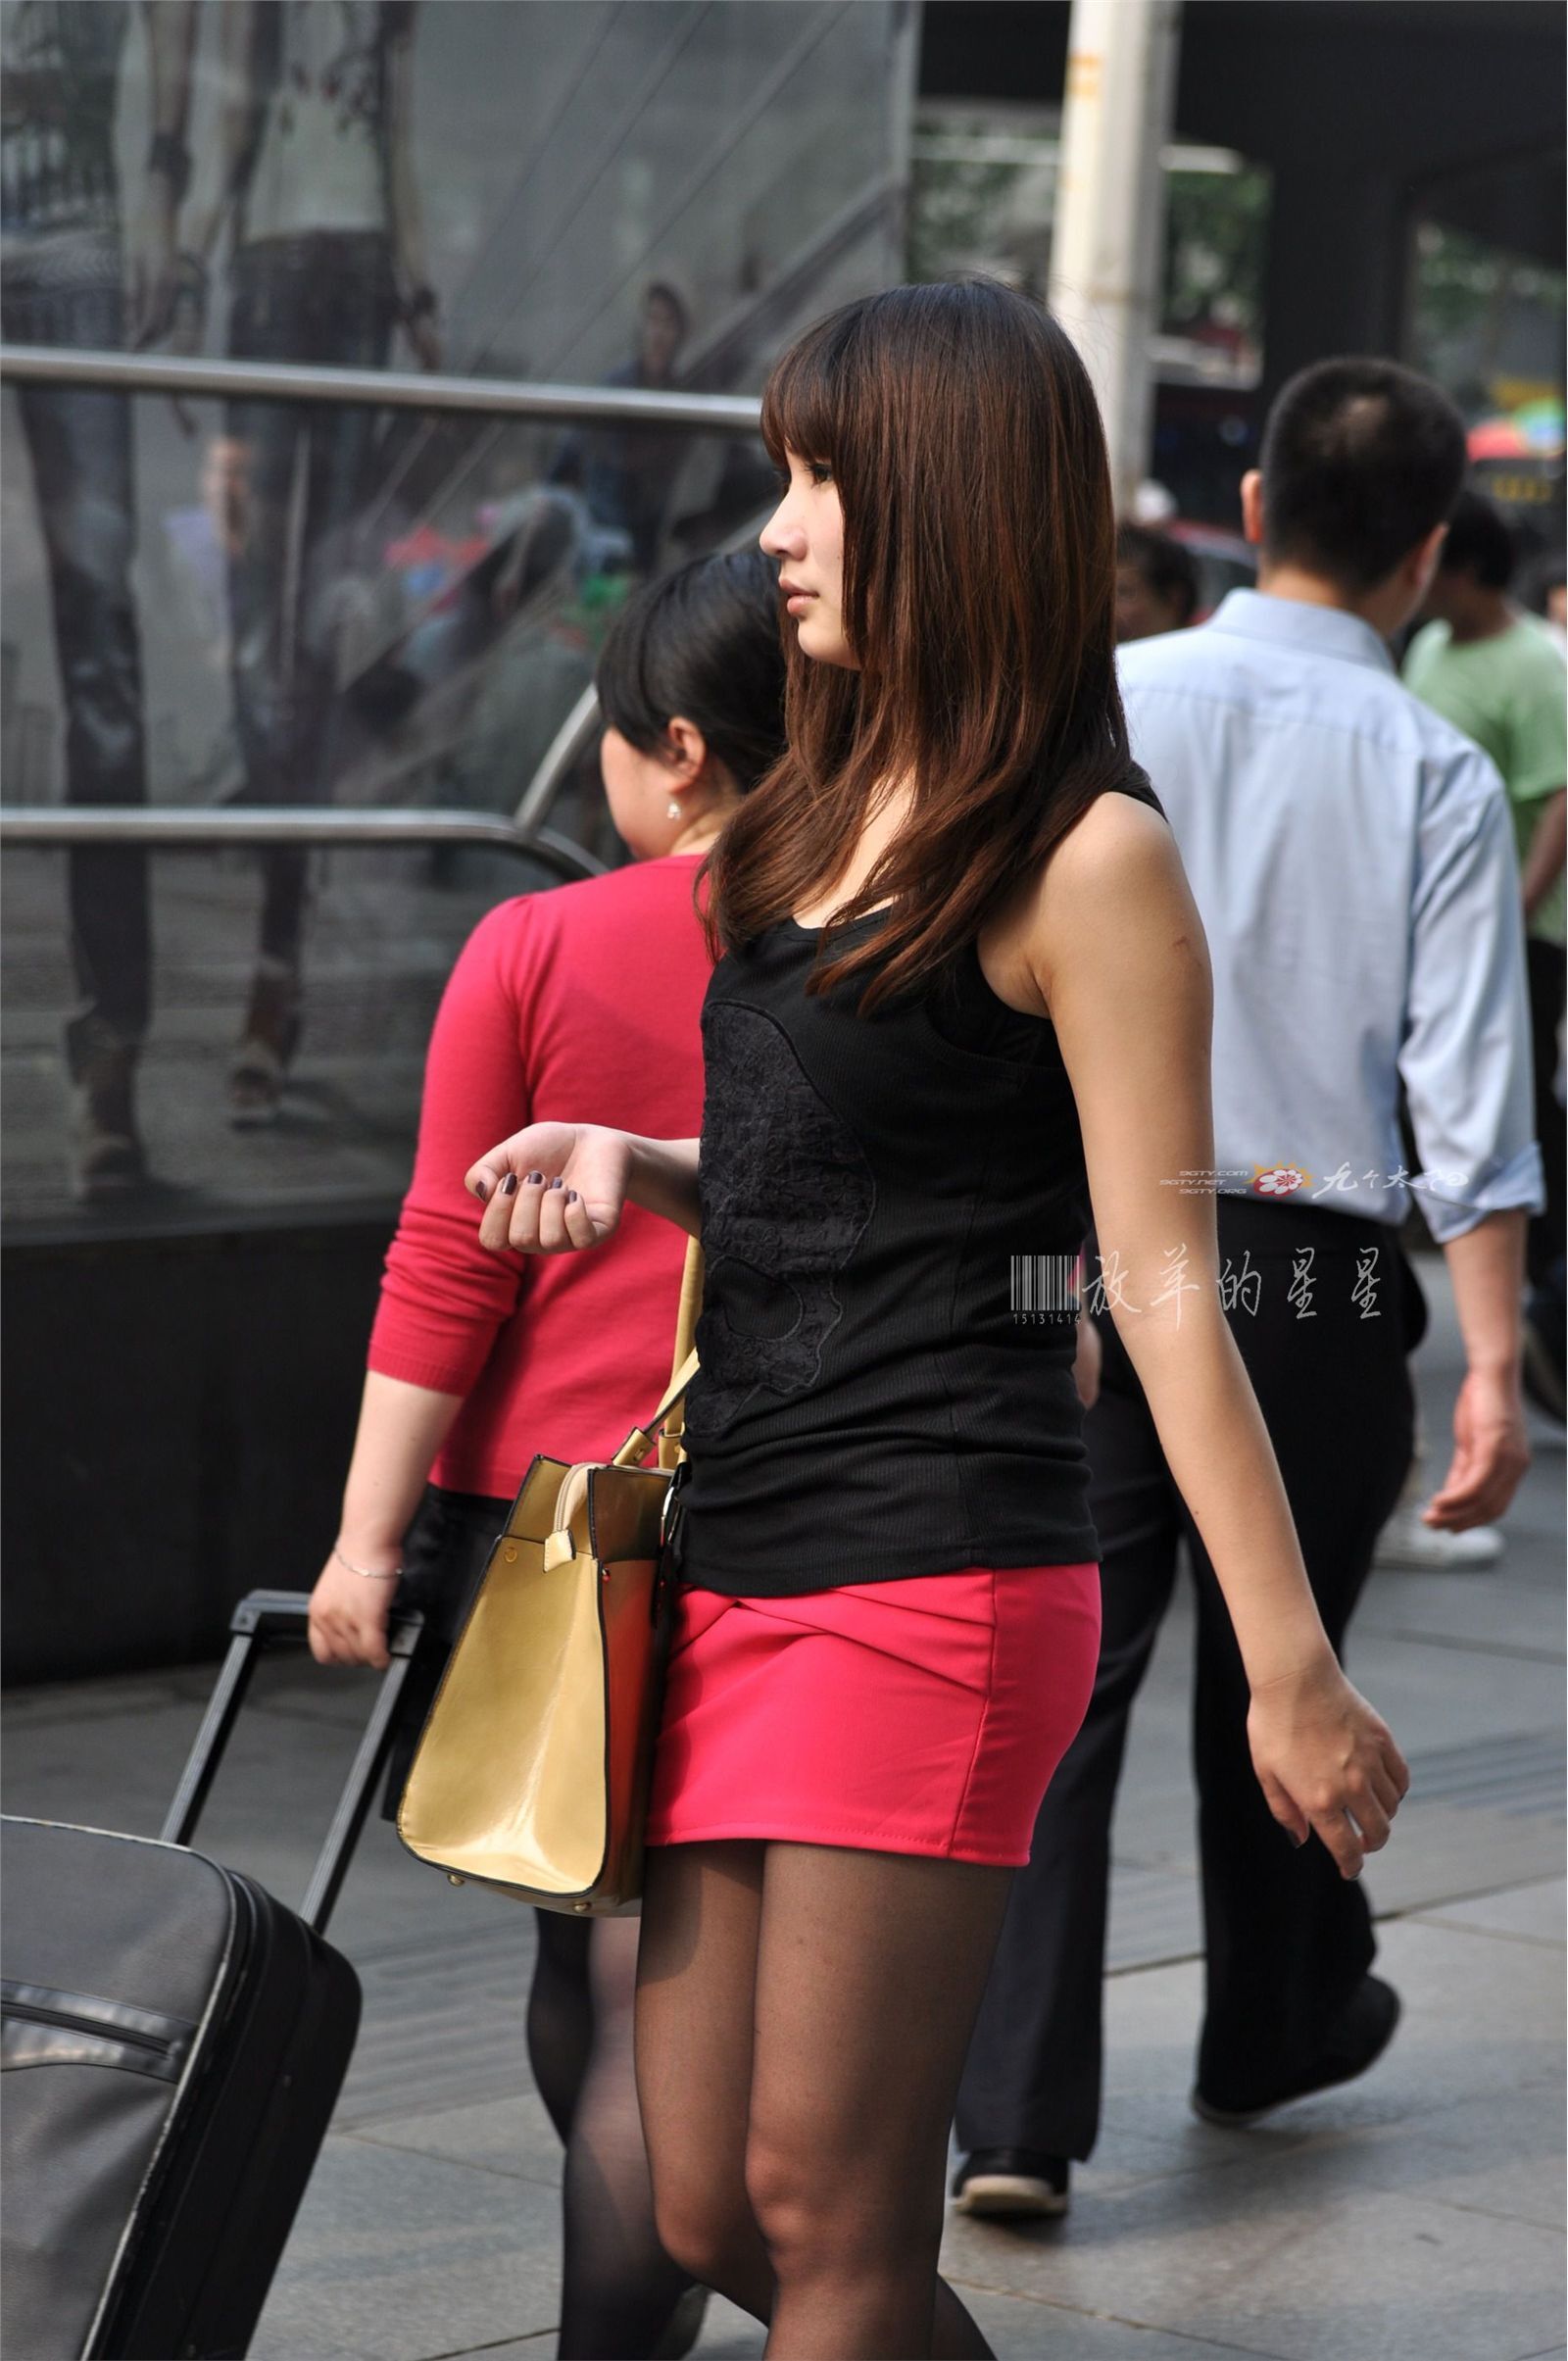 MM's red skirt and black silk legs look very eye-catching